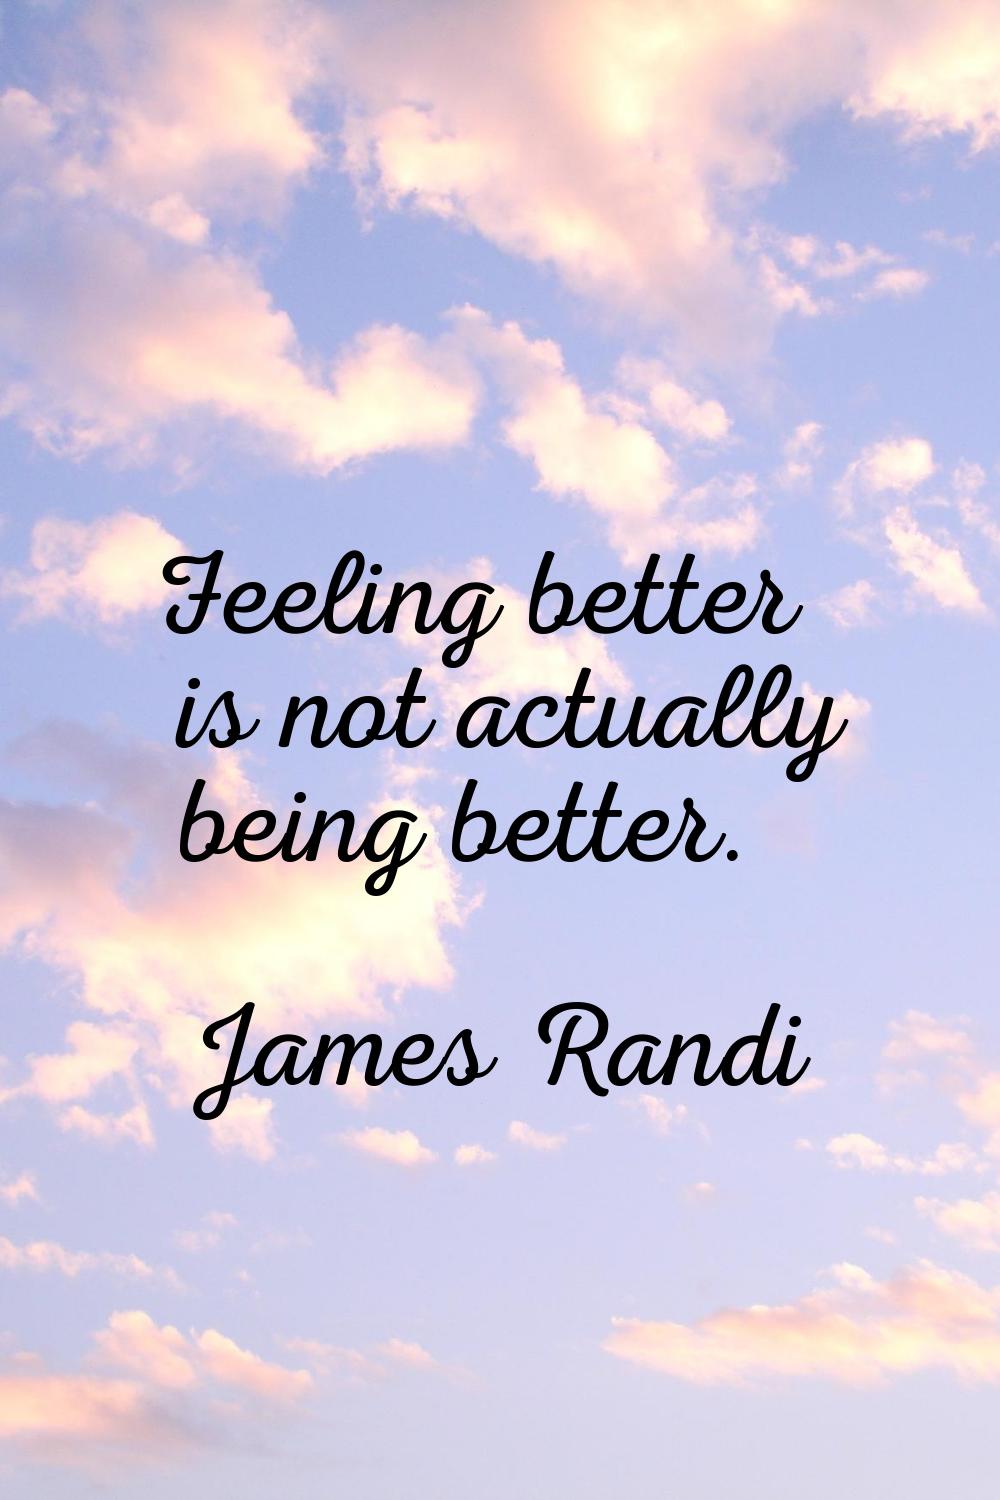 Feeling better is not actually being better.